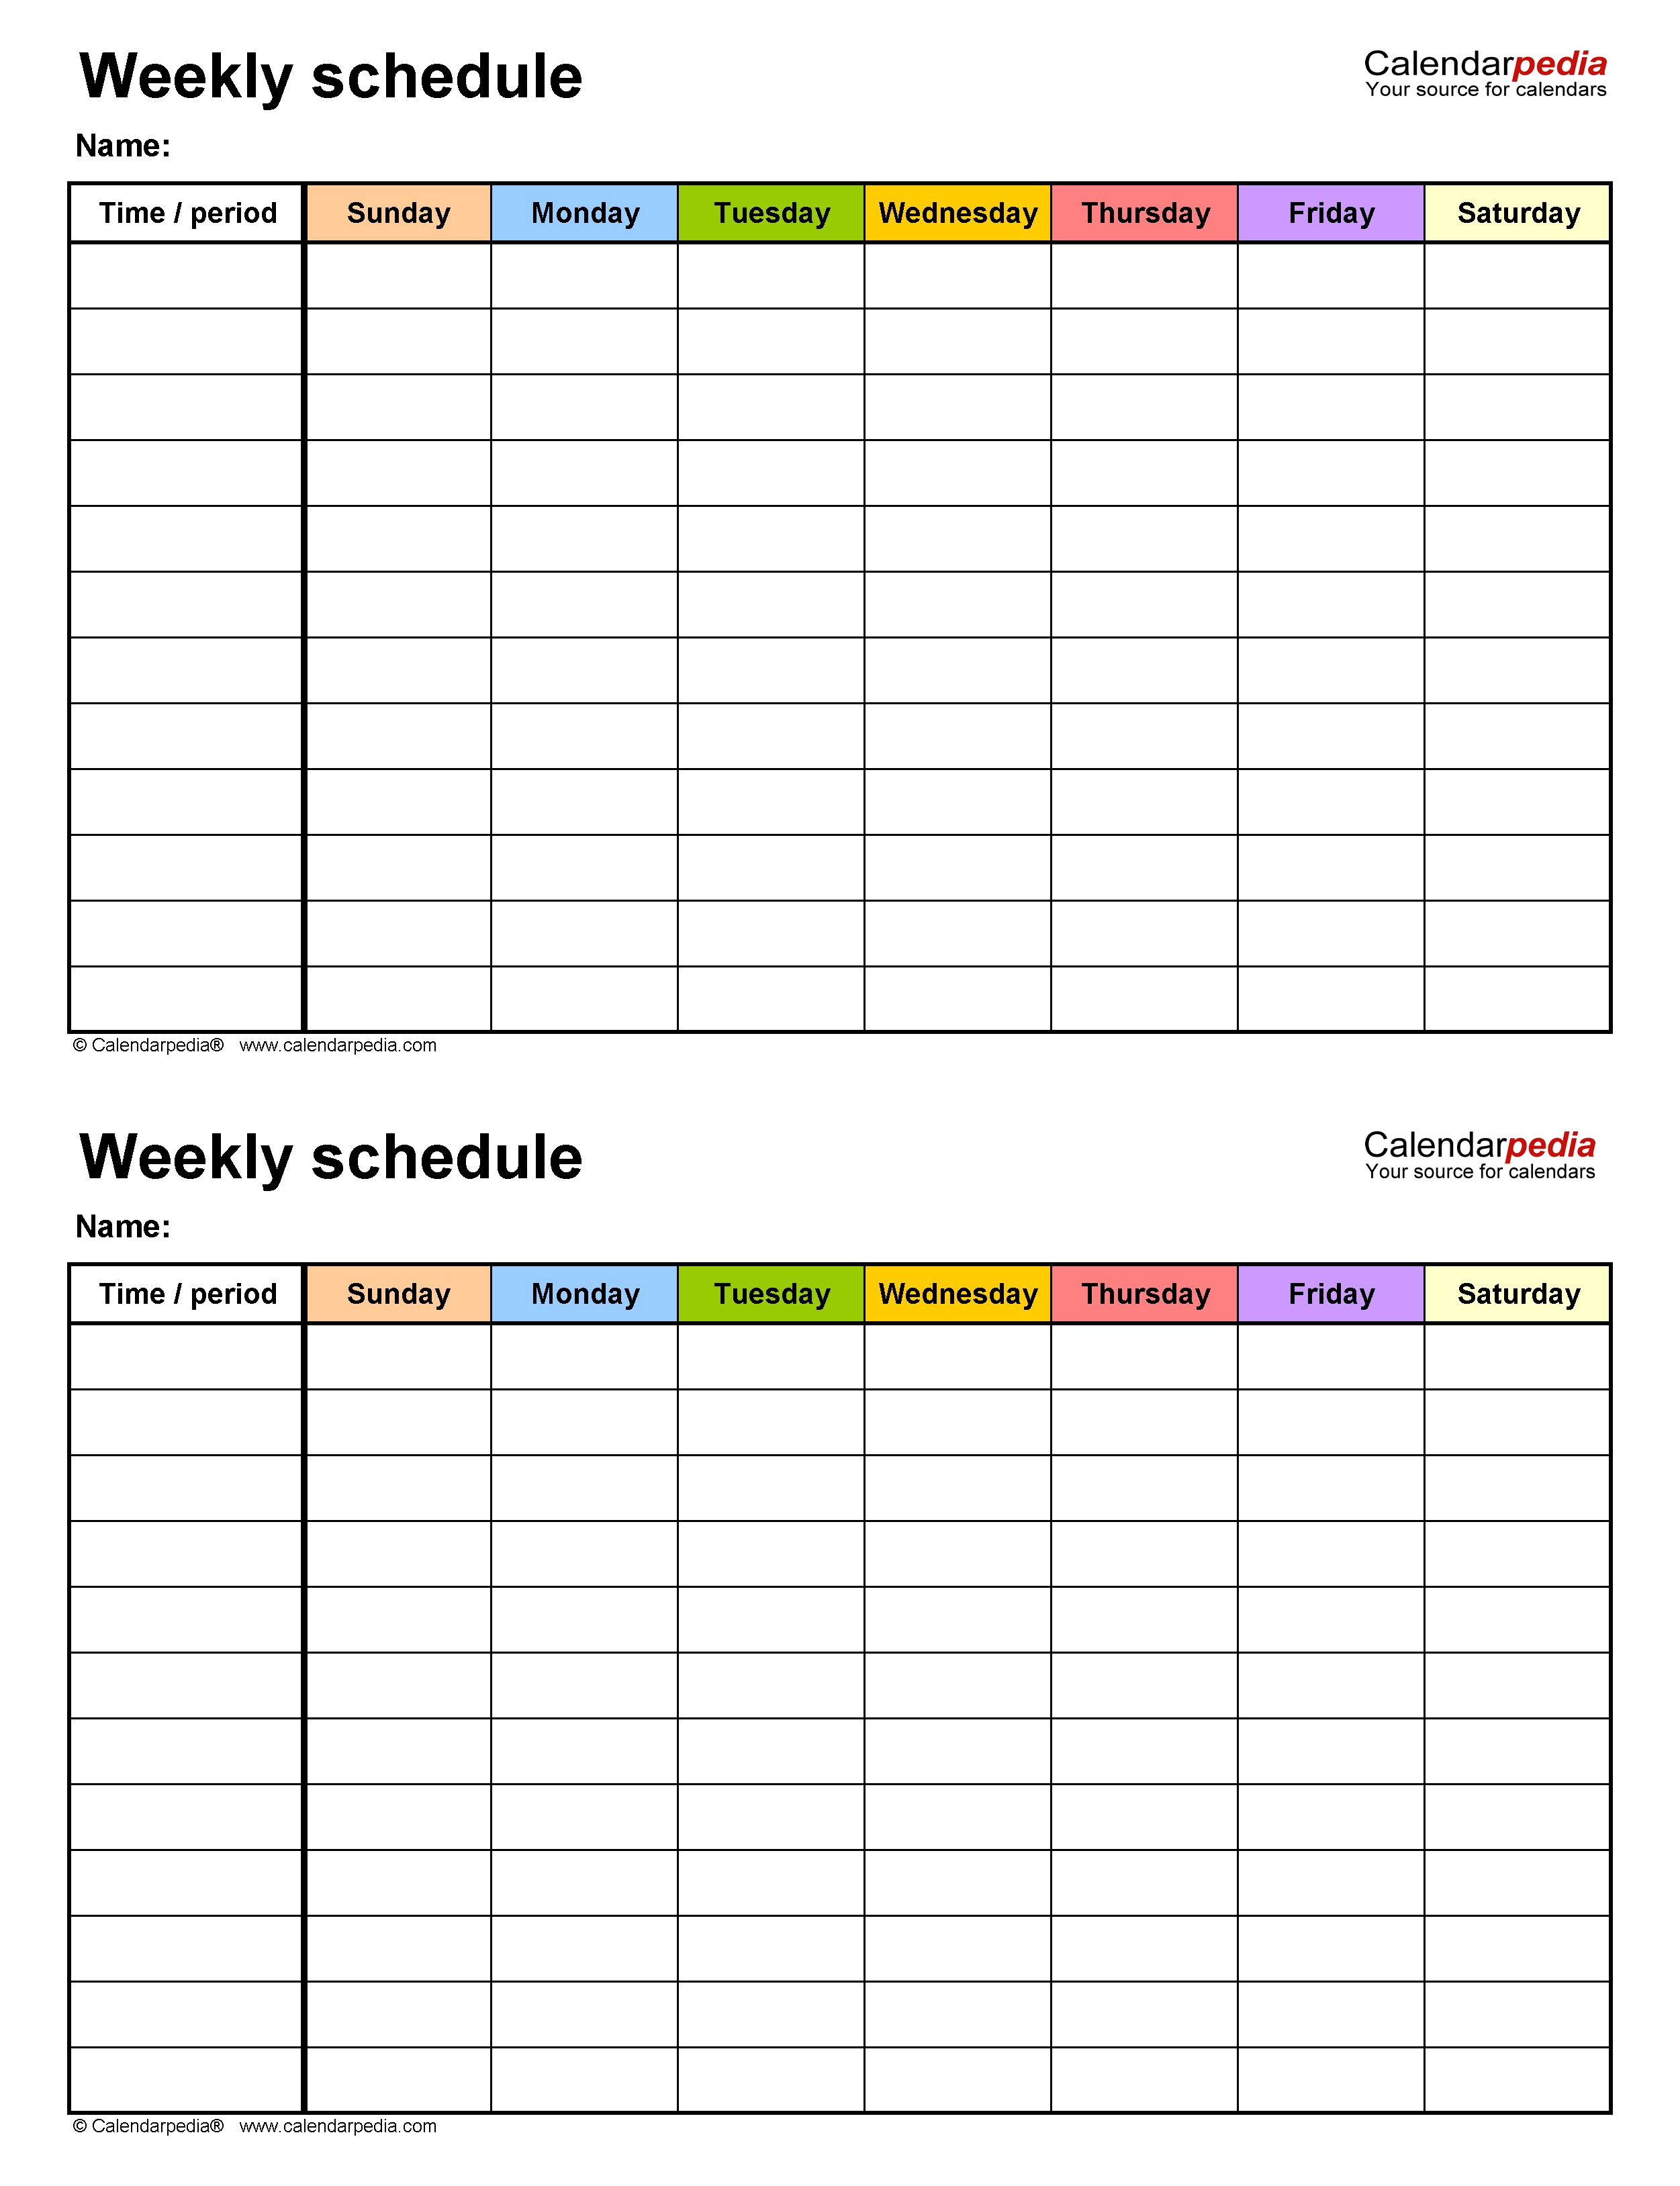 Free Weekly Schedule Templates For Word - 18 Templates Calendar Template Sunday To Saturday